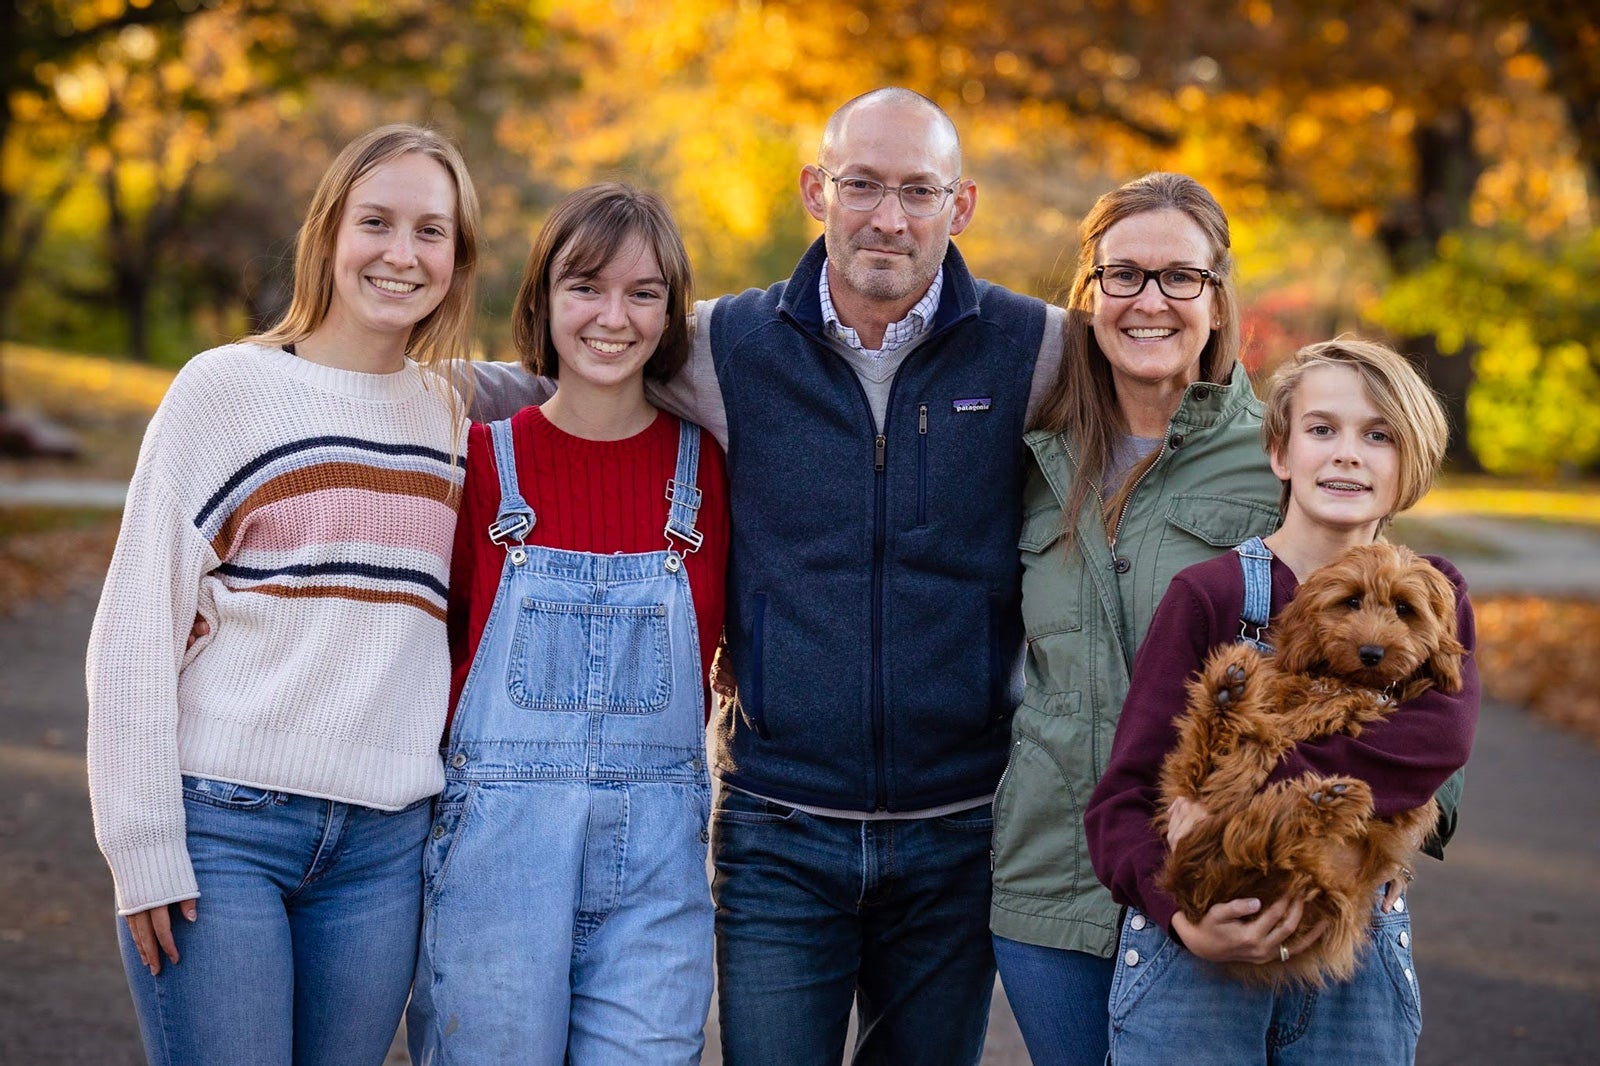 Left to right: Sydney, 20, a junior at the University of Kansas; Sophia, 18, a freshman at Flagler College; David, Sara, Austin, 13, a 7th grader; and Millstone, or “Millie,” a mini goldendoodle.